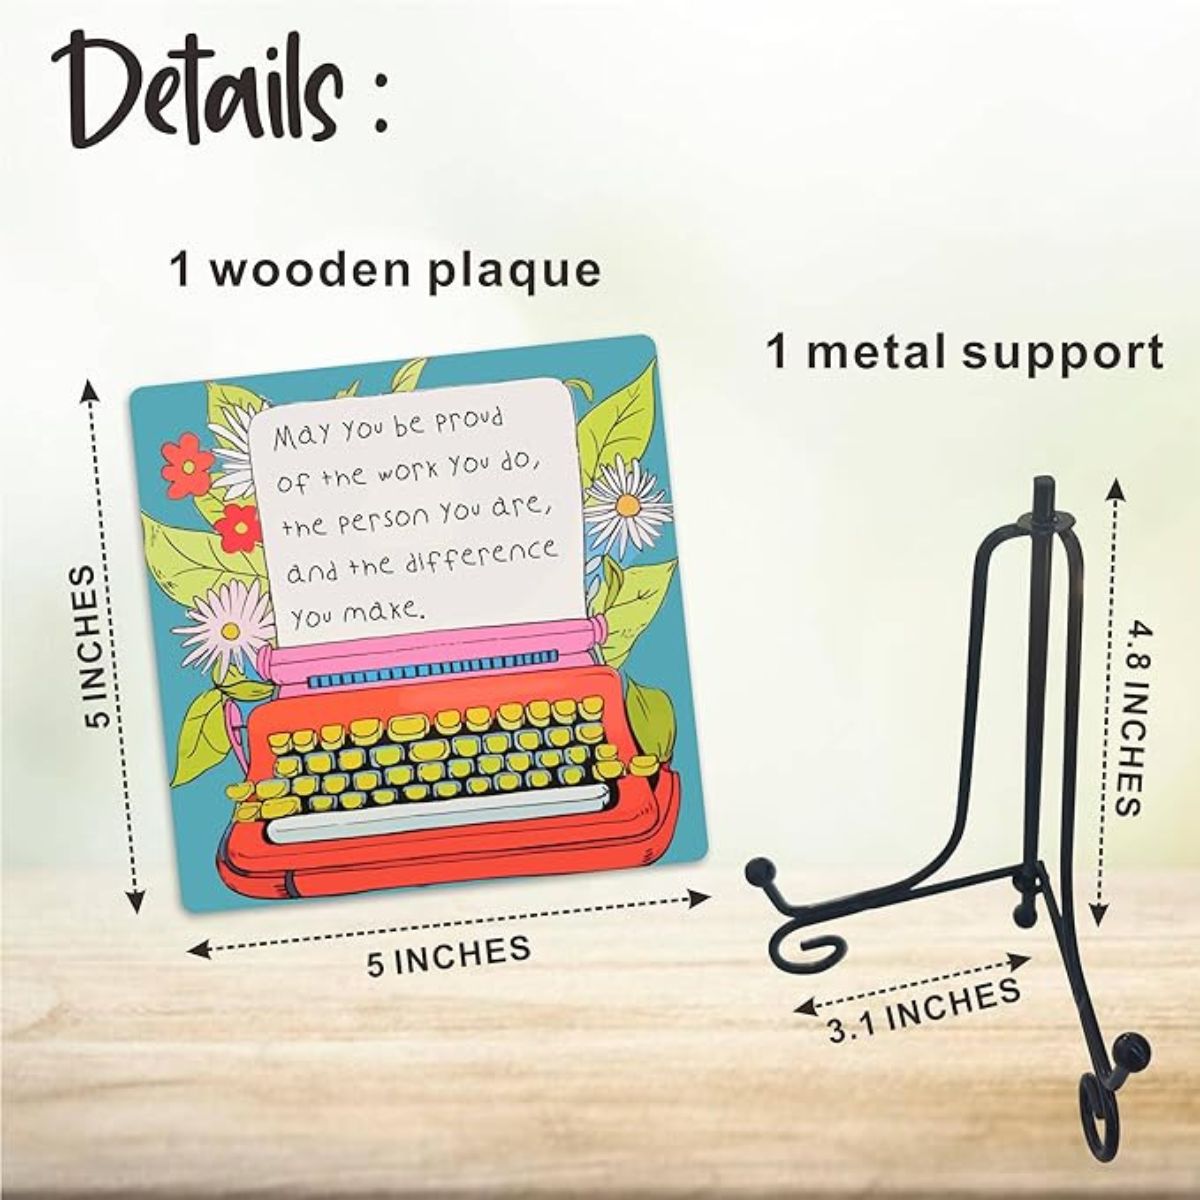 Wooden Typewriter Decor with Metal Support